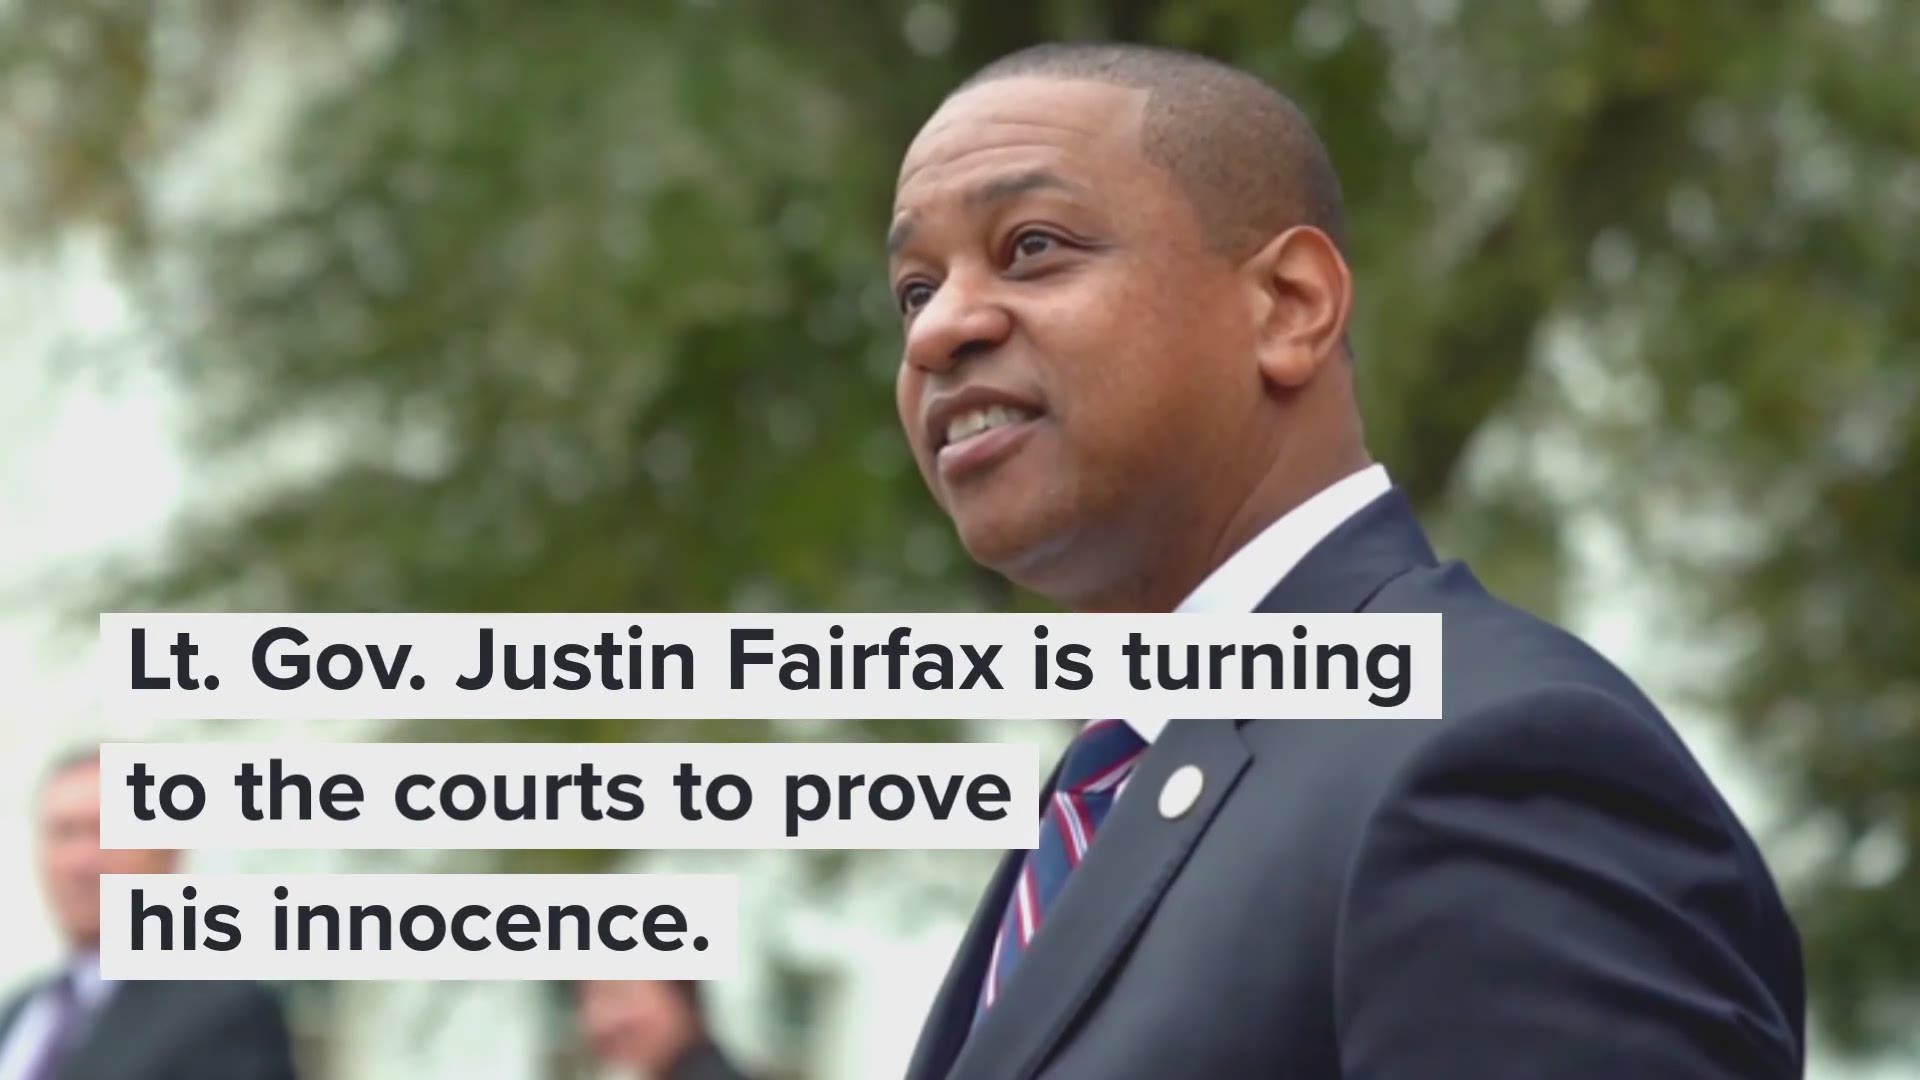 For a brief time – no more than a weekend – the Virginia governor’s mansion was in sight. Now Justin Fairfax is going to court in the fight of his political life.